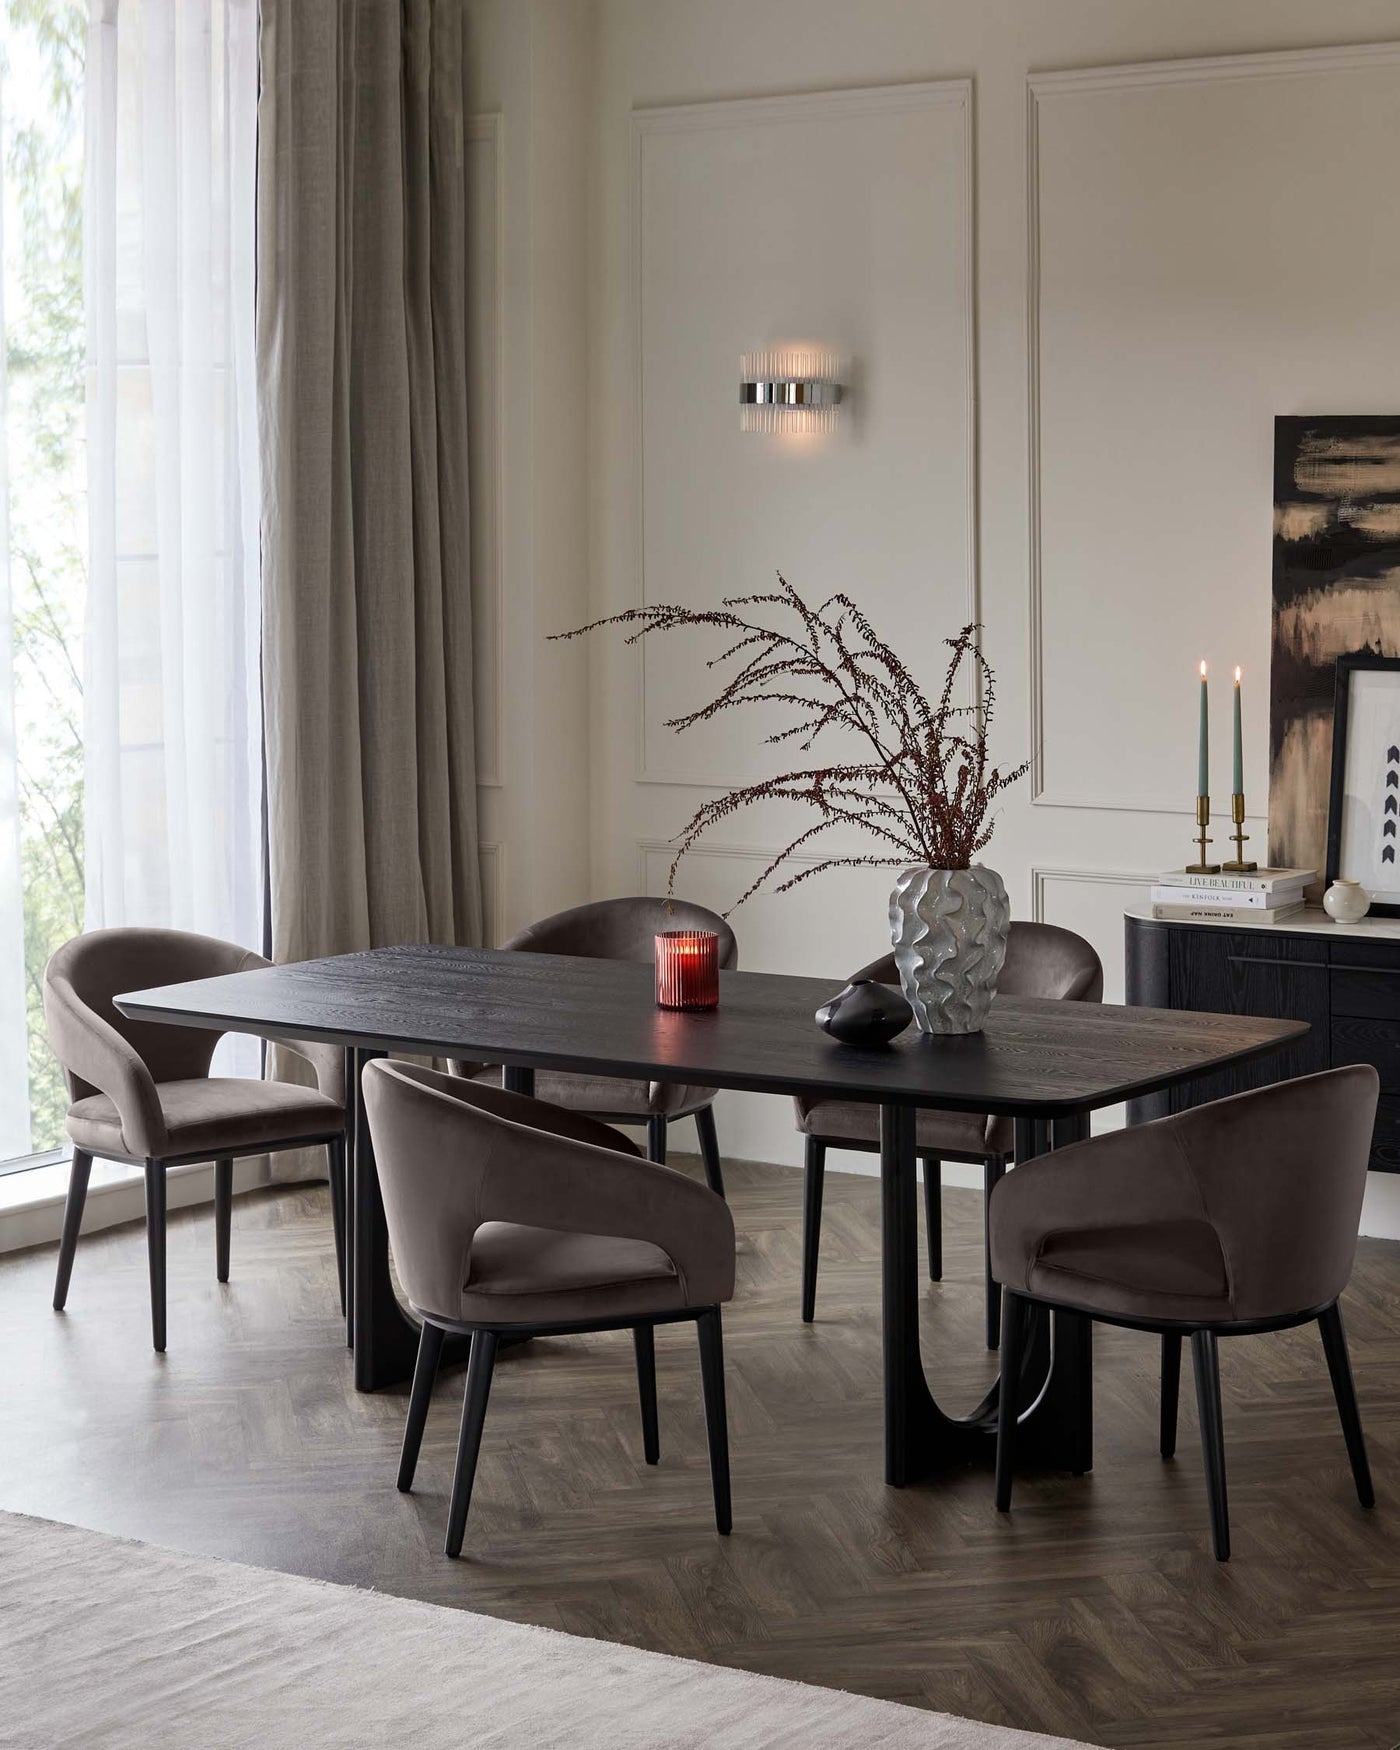 A contemporary dining set featuring a dark wooden table with an organic edge design and sturdy, u-shaped legs. Accompanied by five plush upholstered chairs with a smooth, rounded backrest and slim black metal legs. The set presents a sophisticated, modern aesthetic suitable for elegant interior dining spaces.